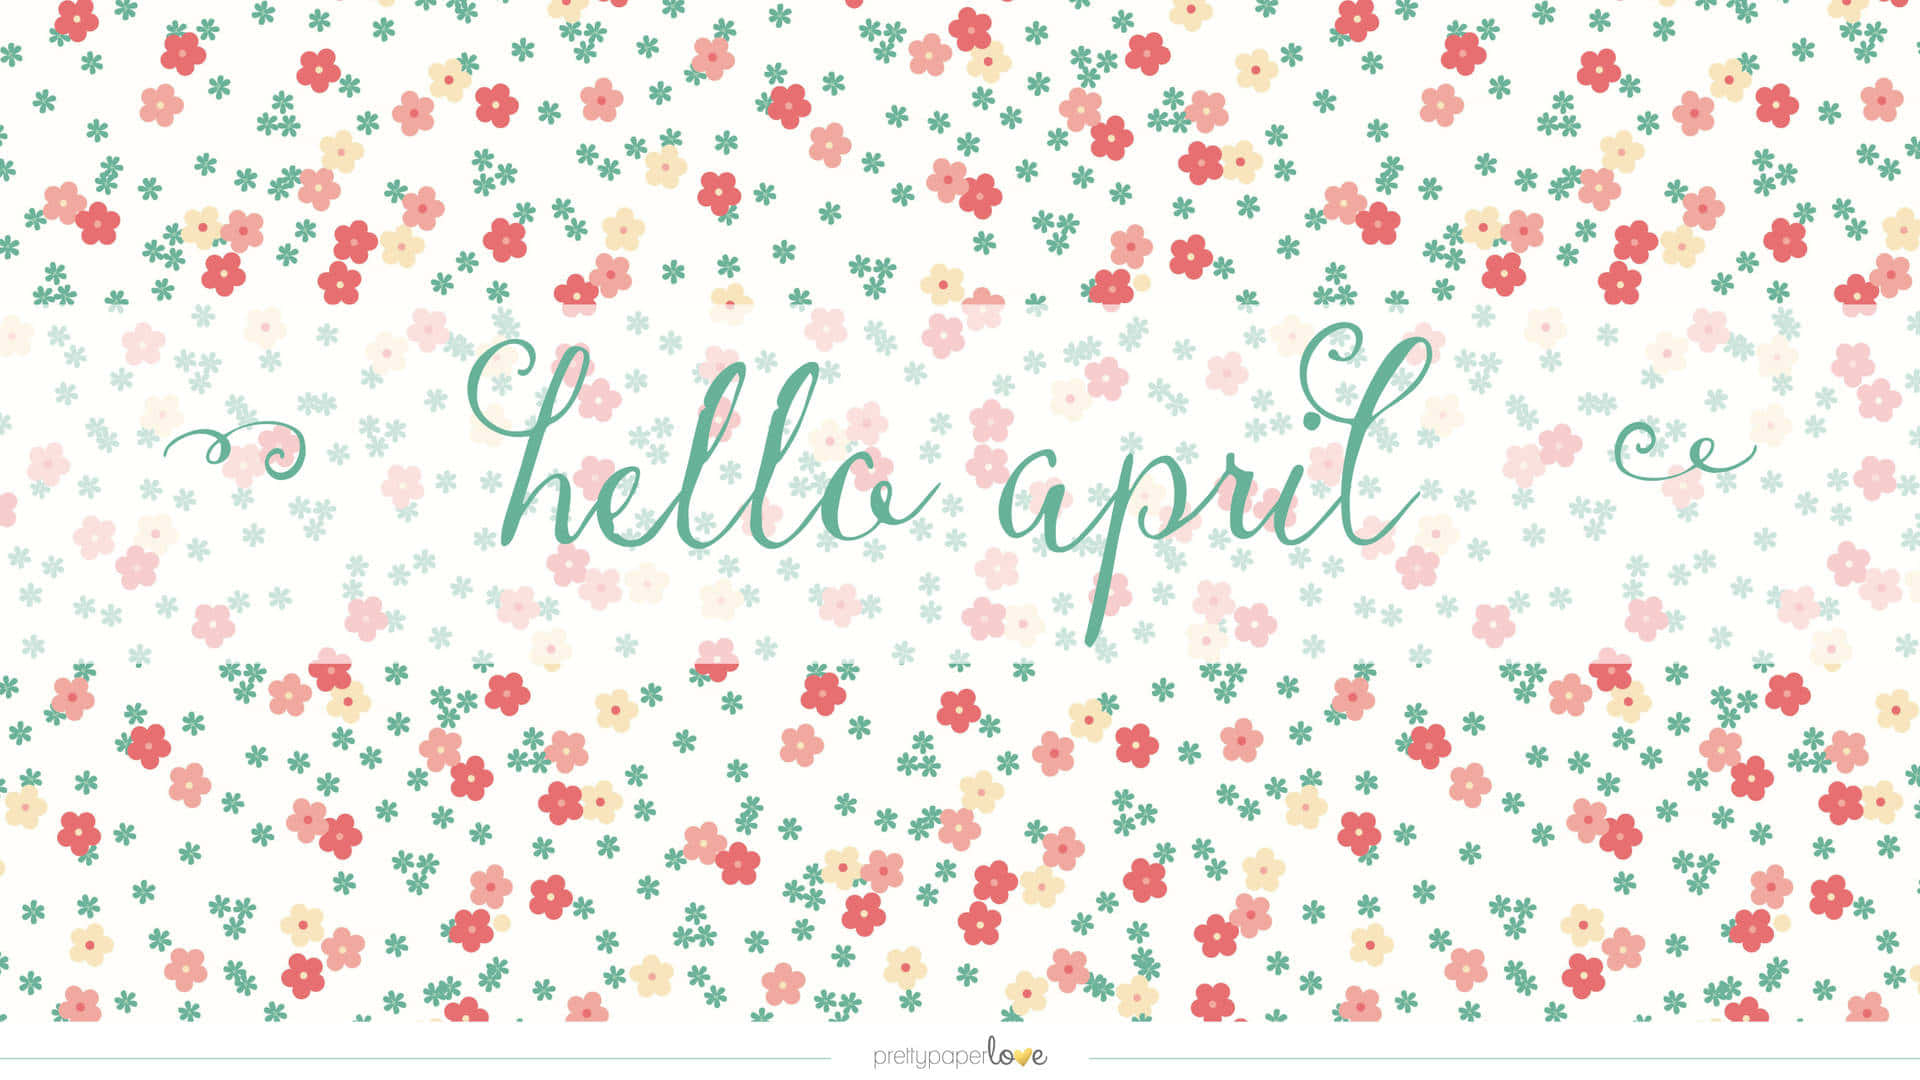 Welcome April!